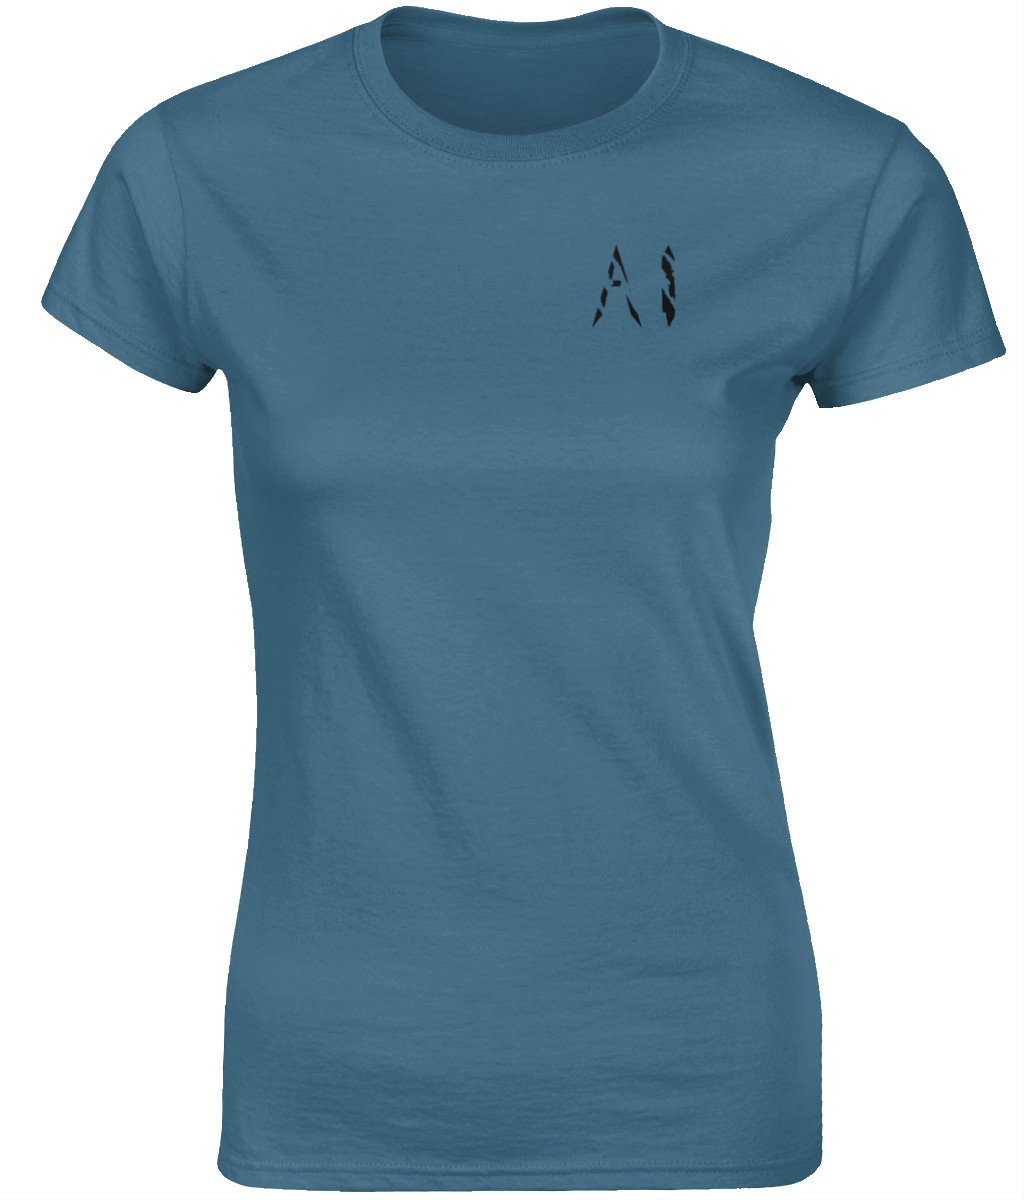 Womens blue grey Fitted Ringspun T-Shirt with black AI logo on left breast